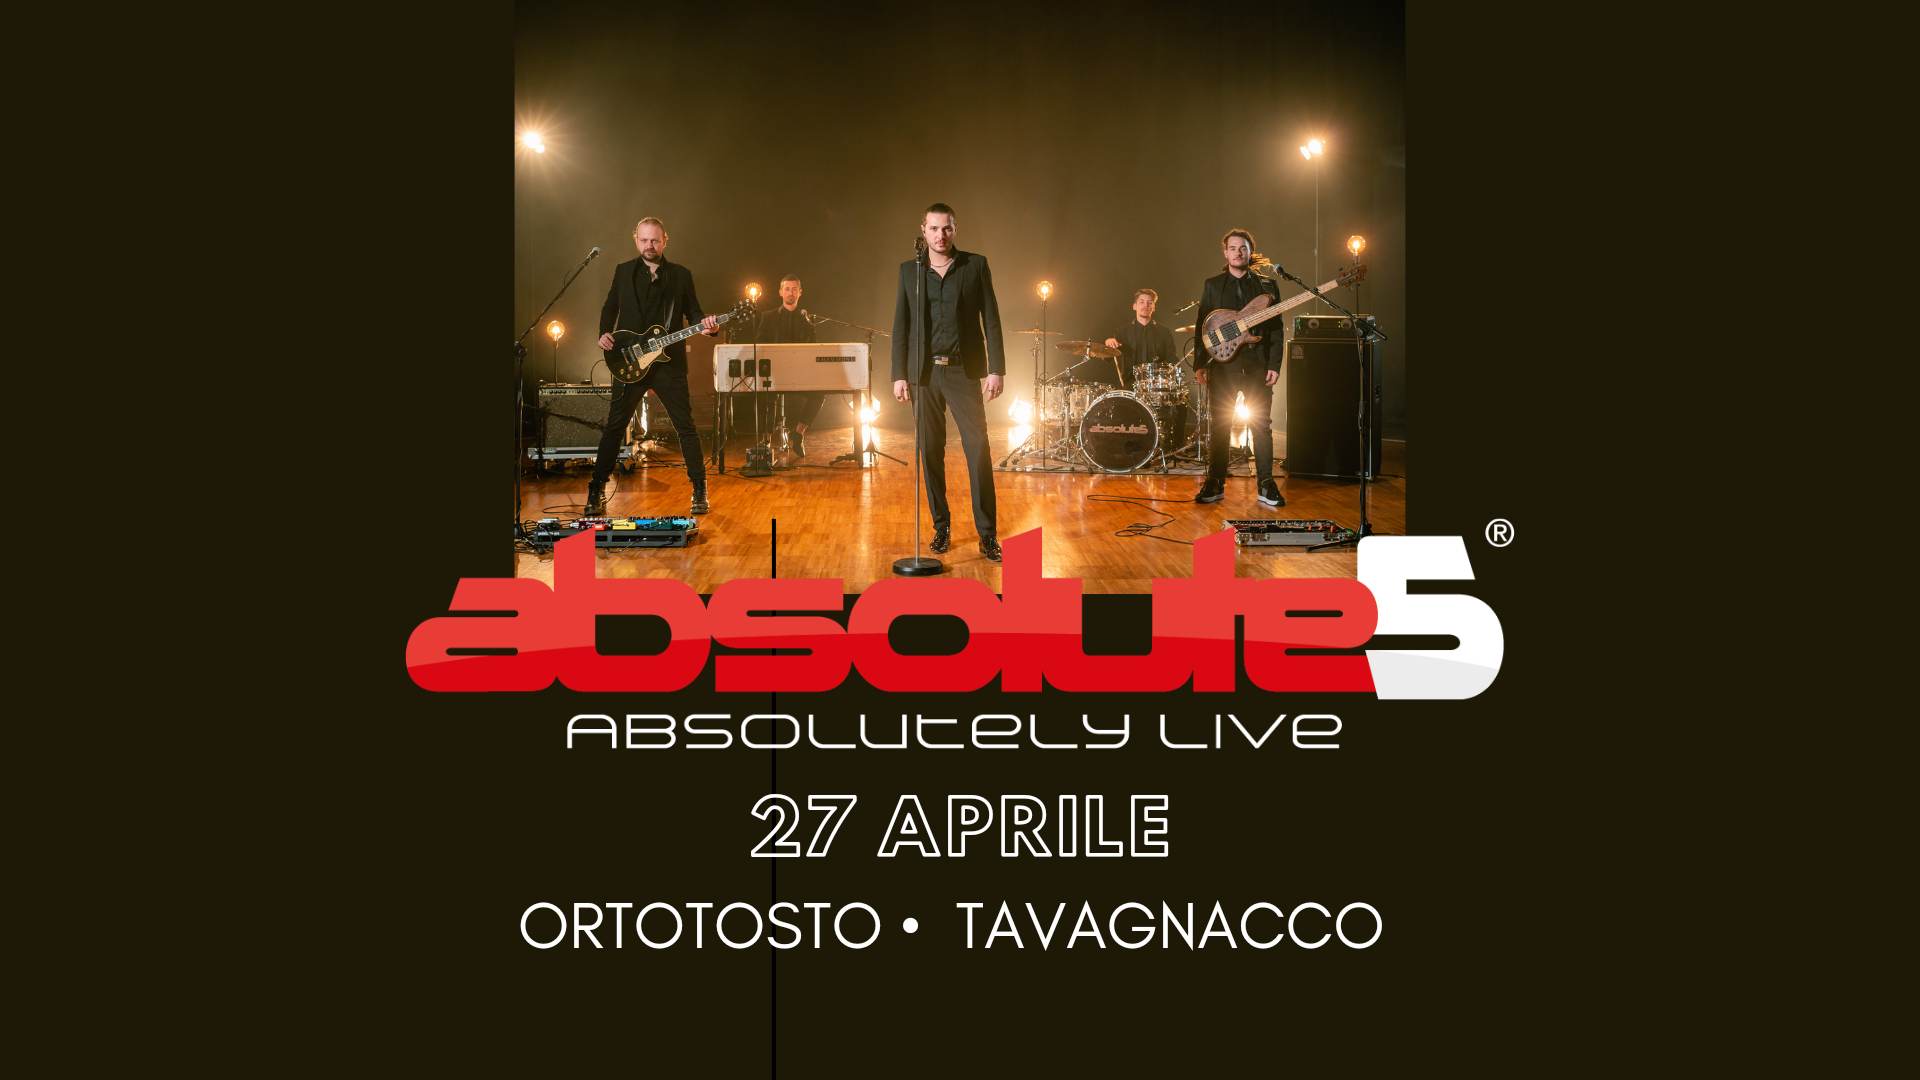 Absolute5 LIVE all'Ortotosto